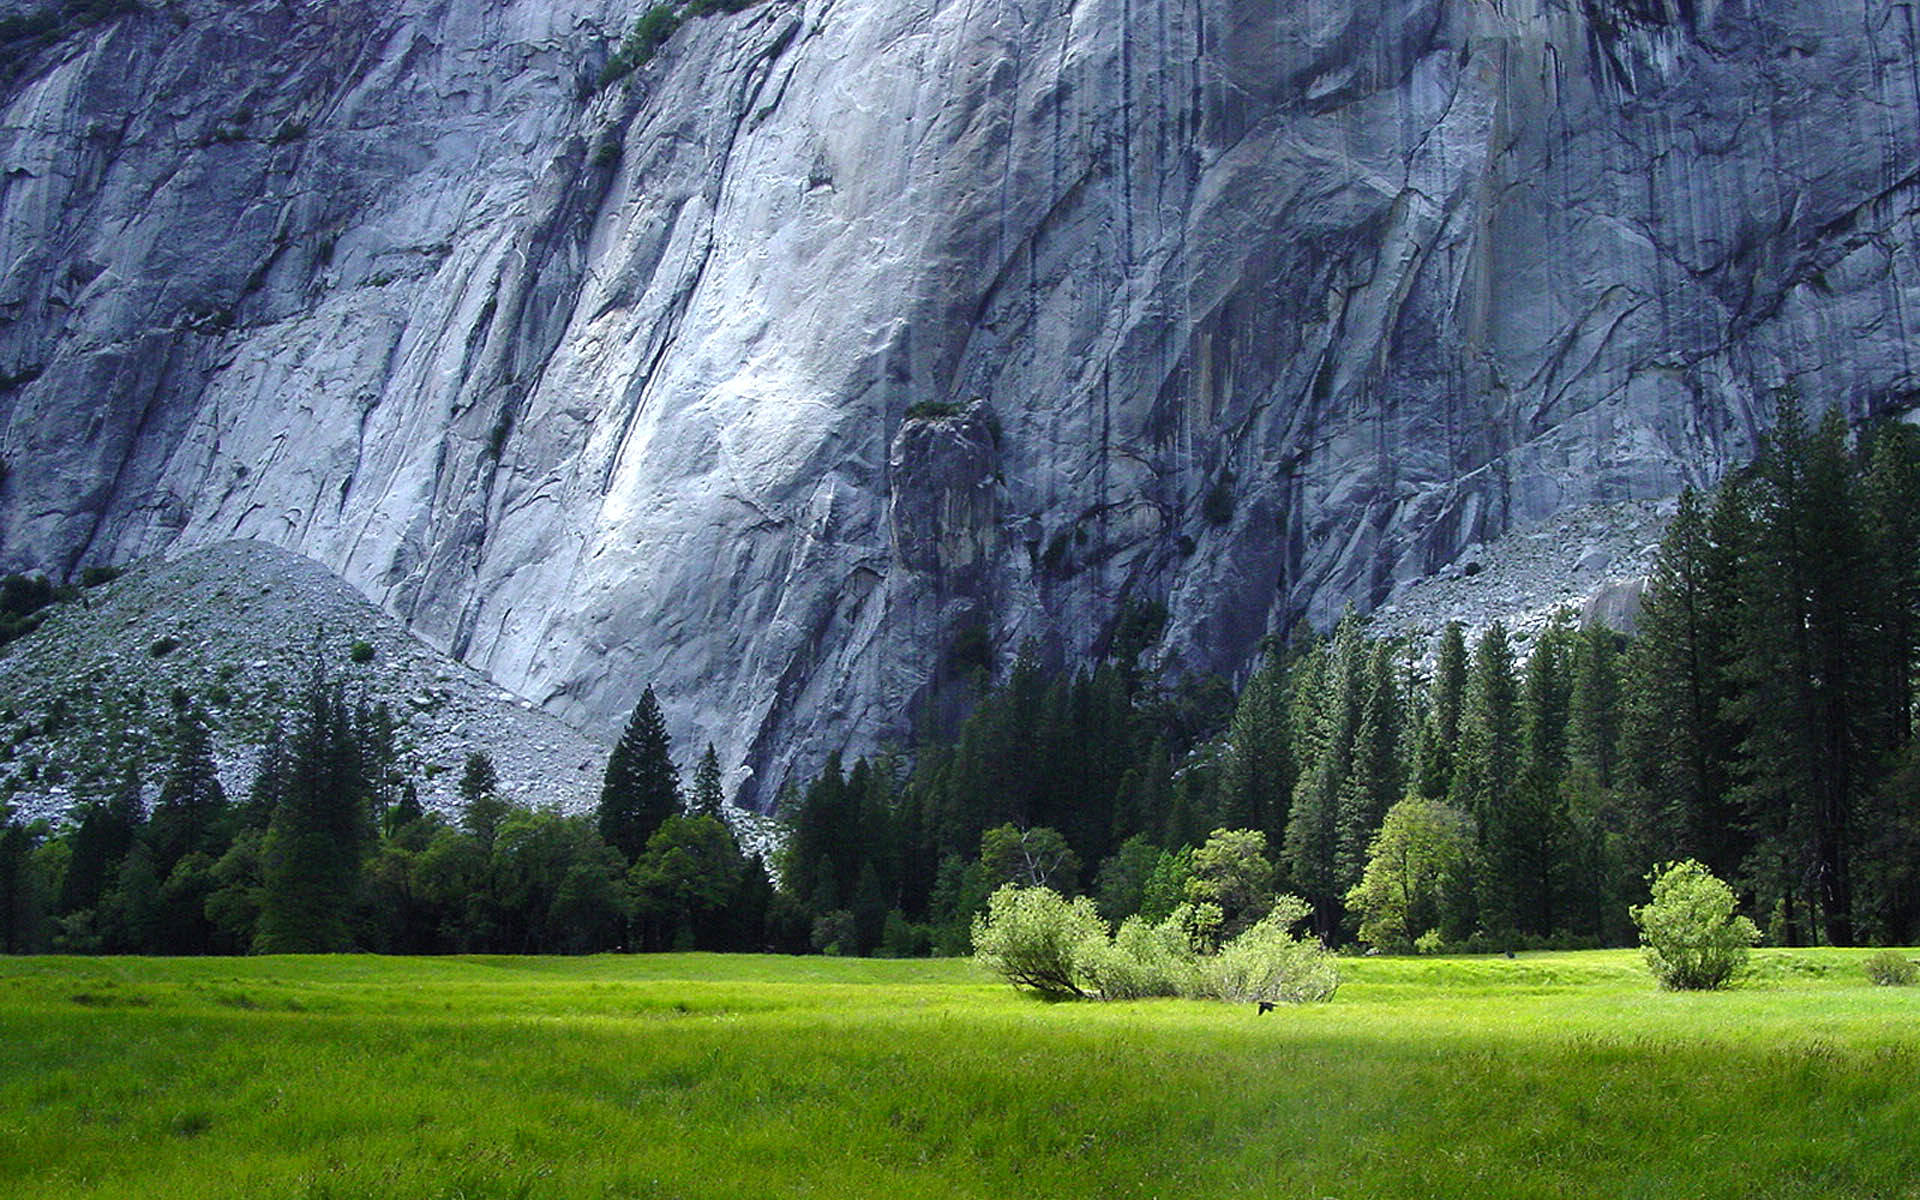 Rock Face Yosemite Best Background Full HD1920x1080p, 1280x720p, – HD Wallpapers Backgrounds Desktop, iphone & Android Free Download